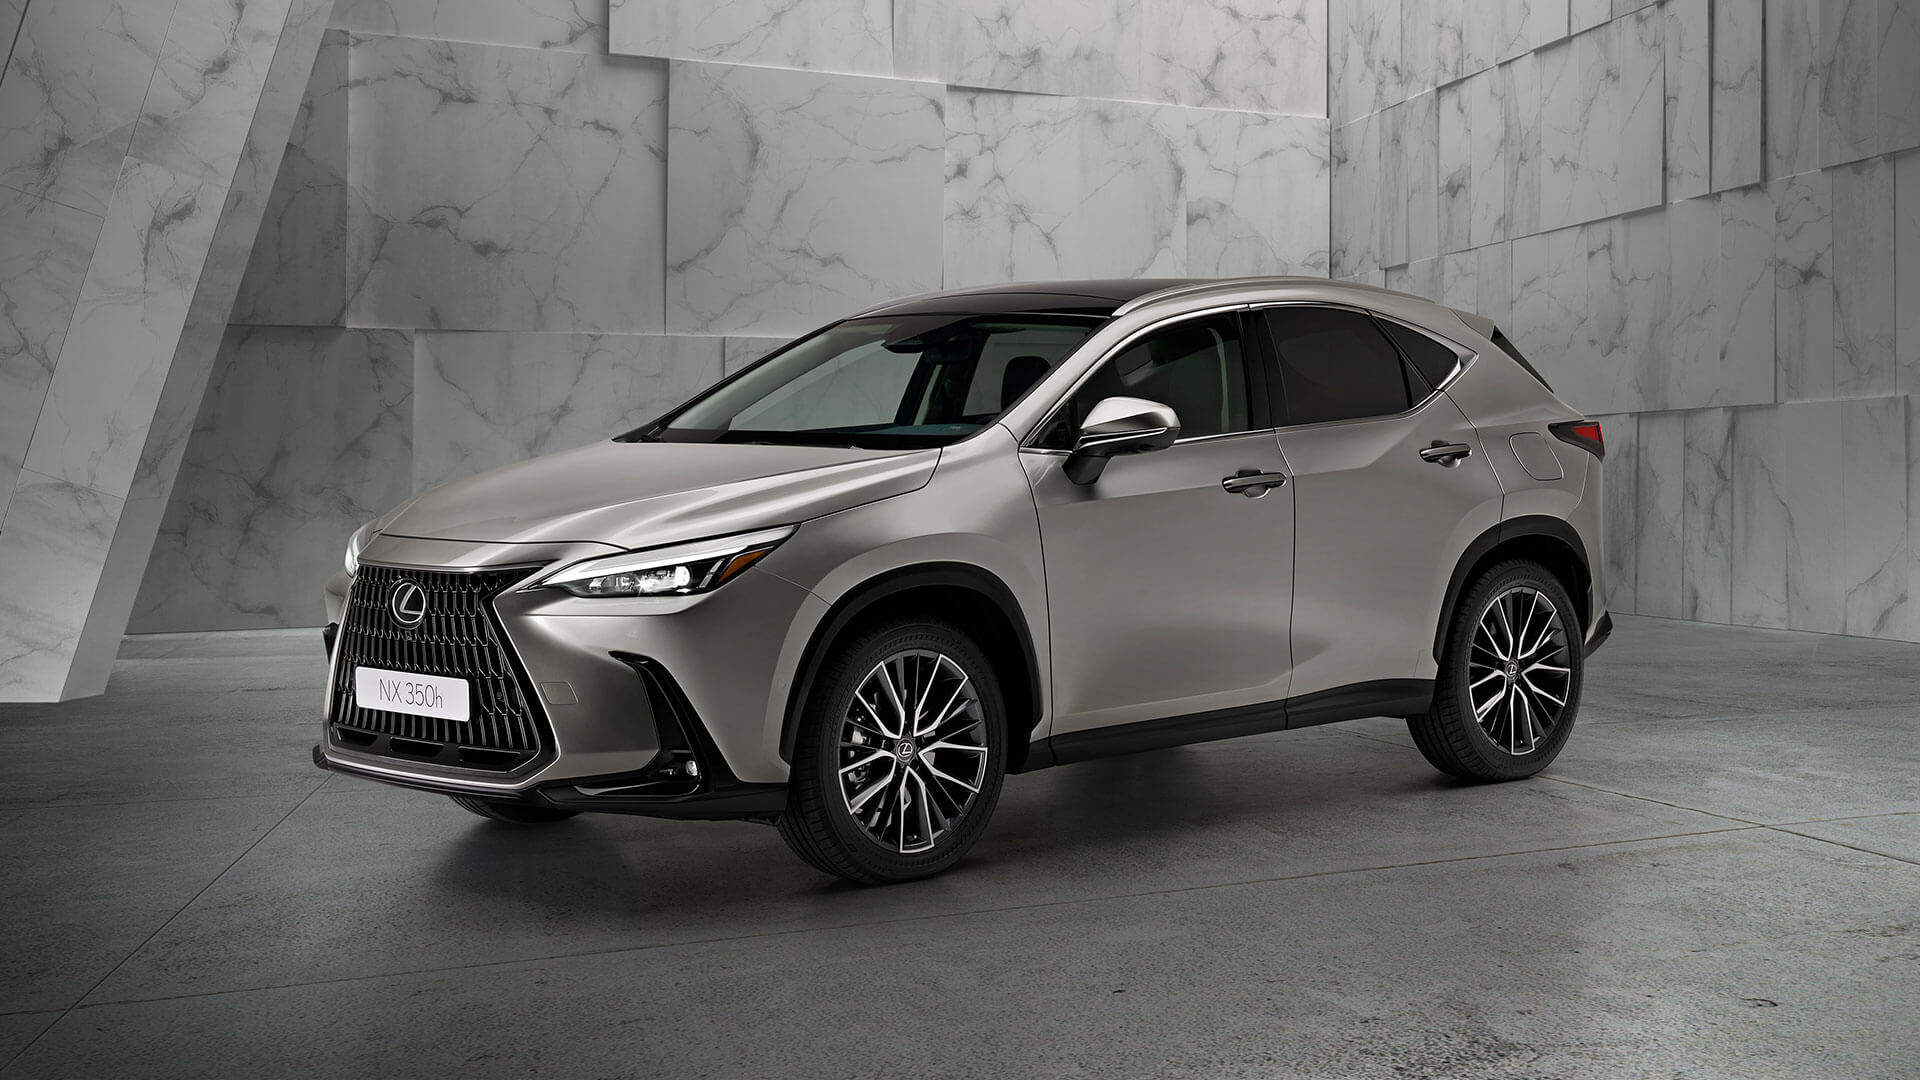 2021-lexus-all-new-nx-overview-350h-gallery-01-1920x1080